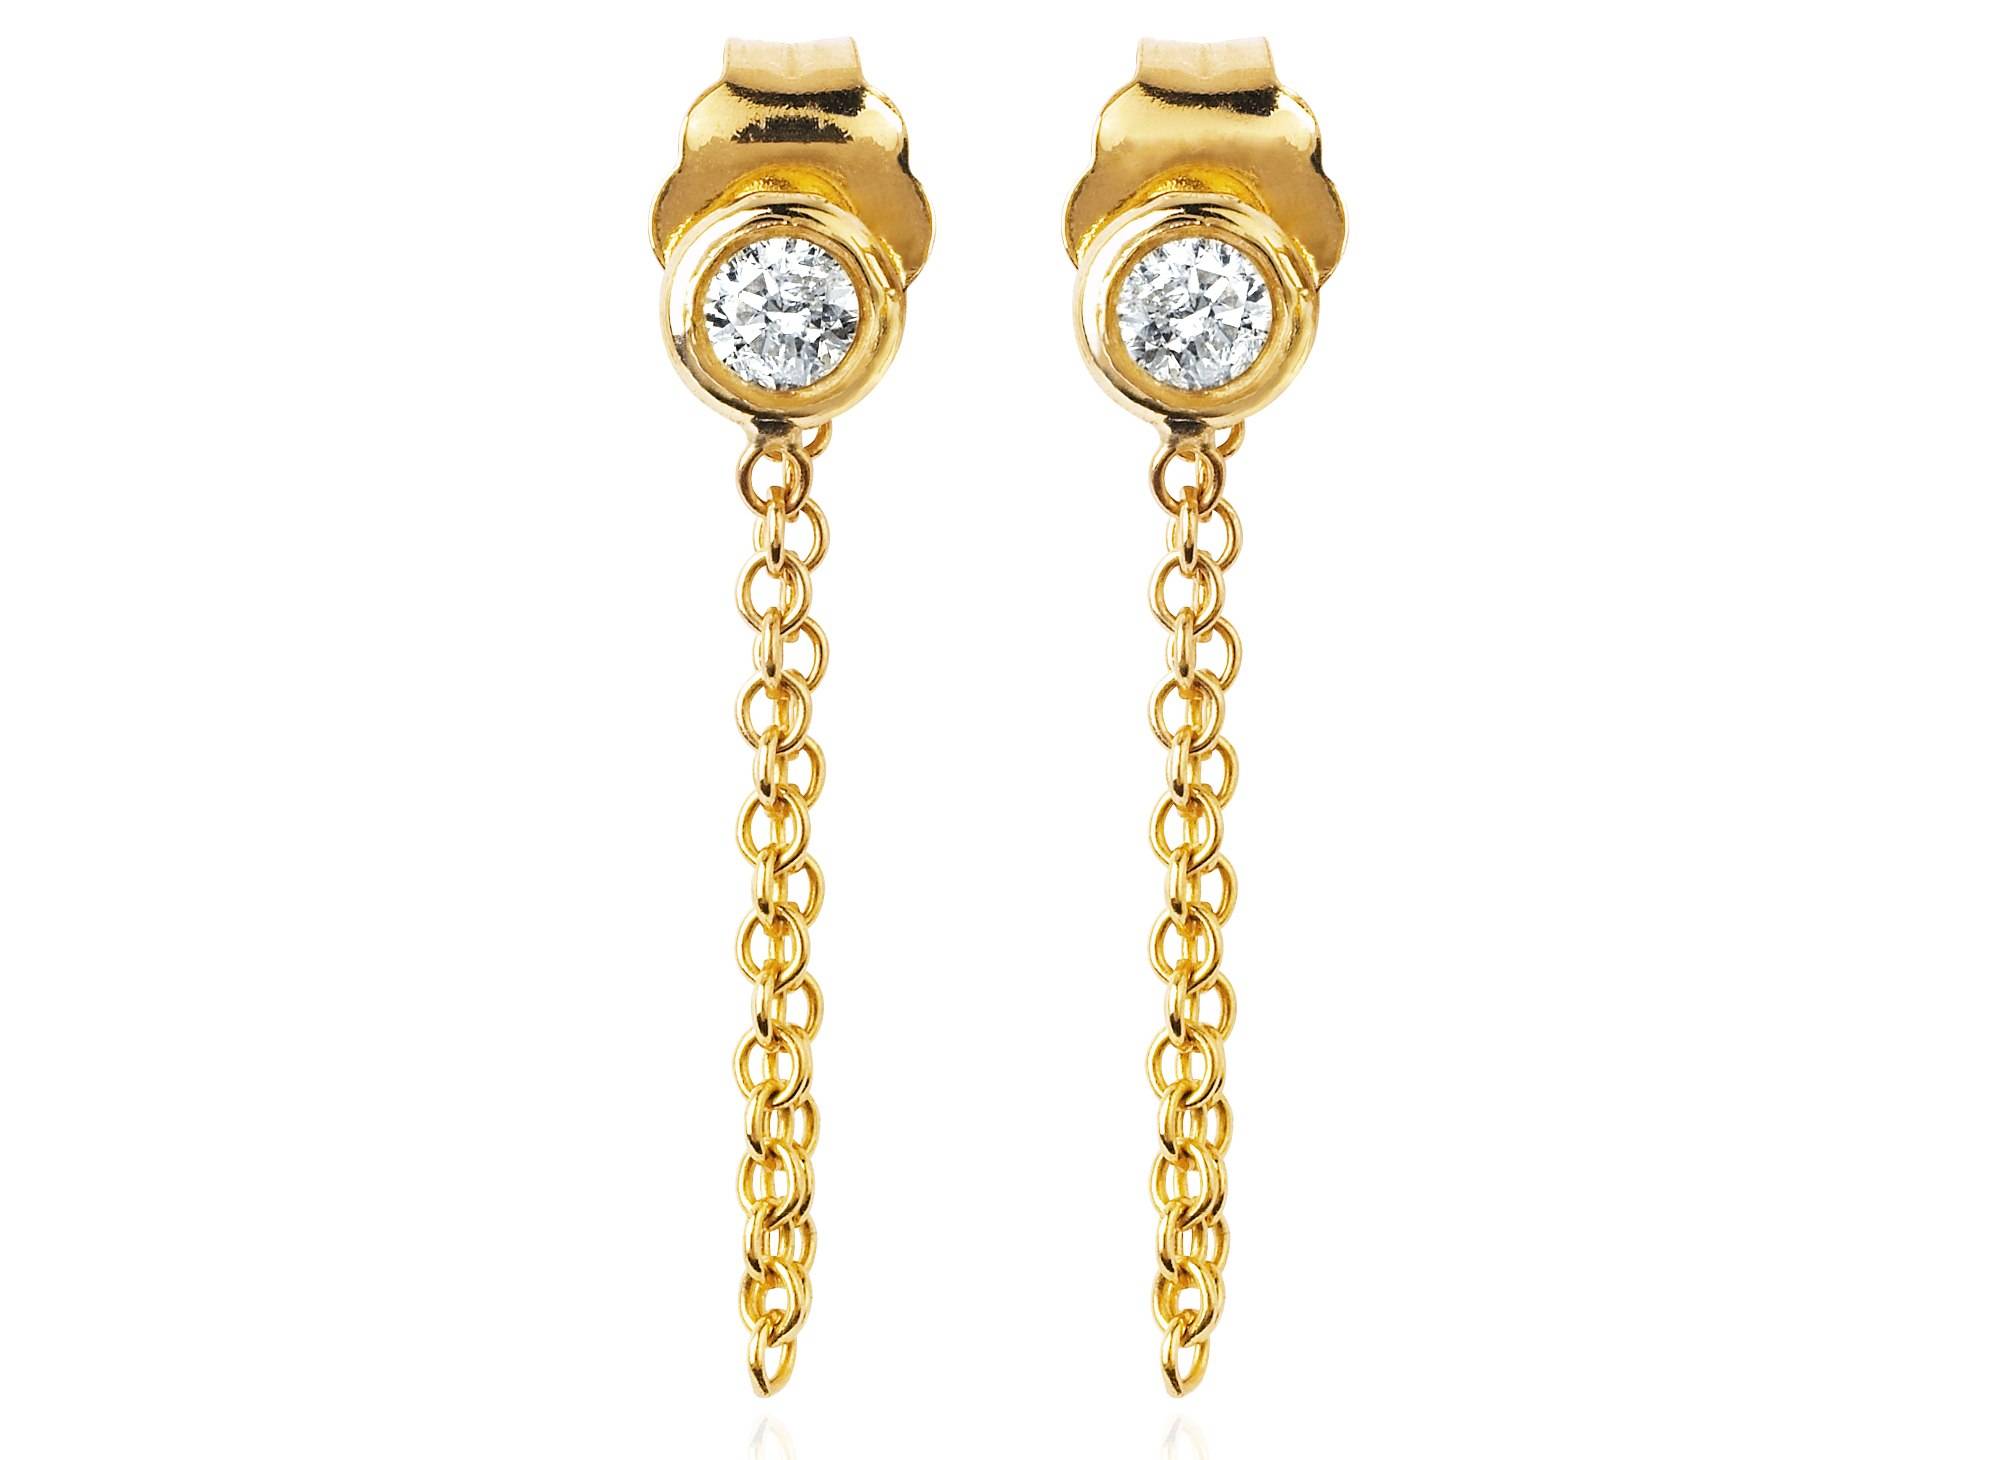 7 Golden Boutique Jewelry Finds Perfect For Spring